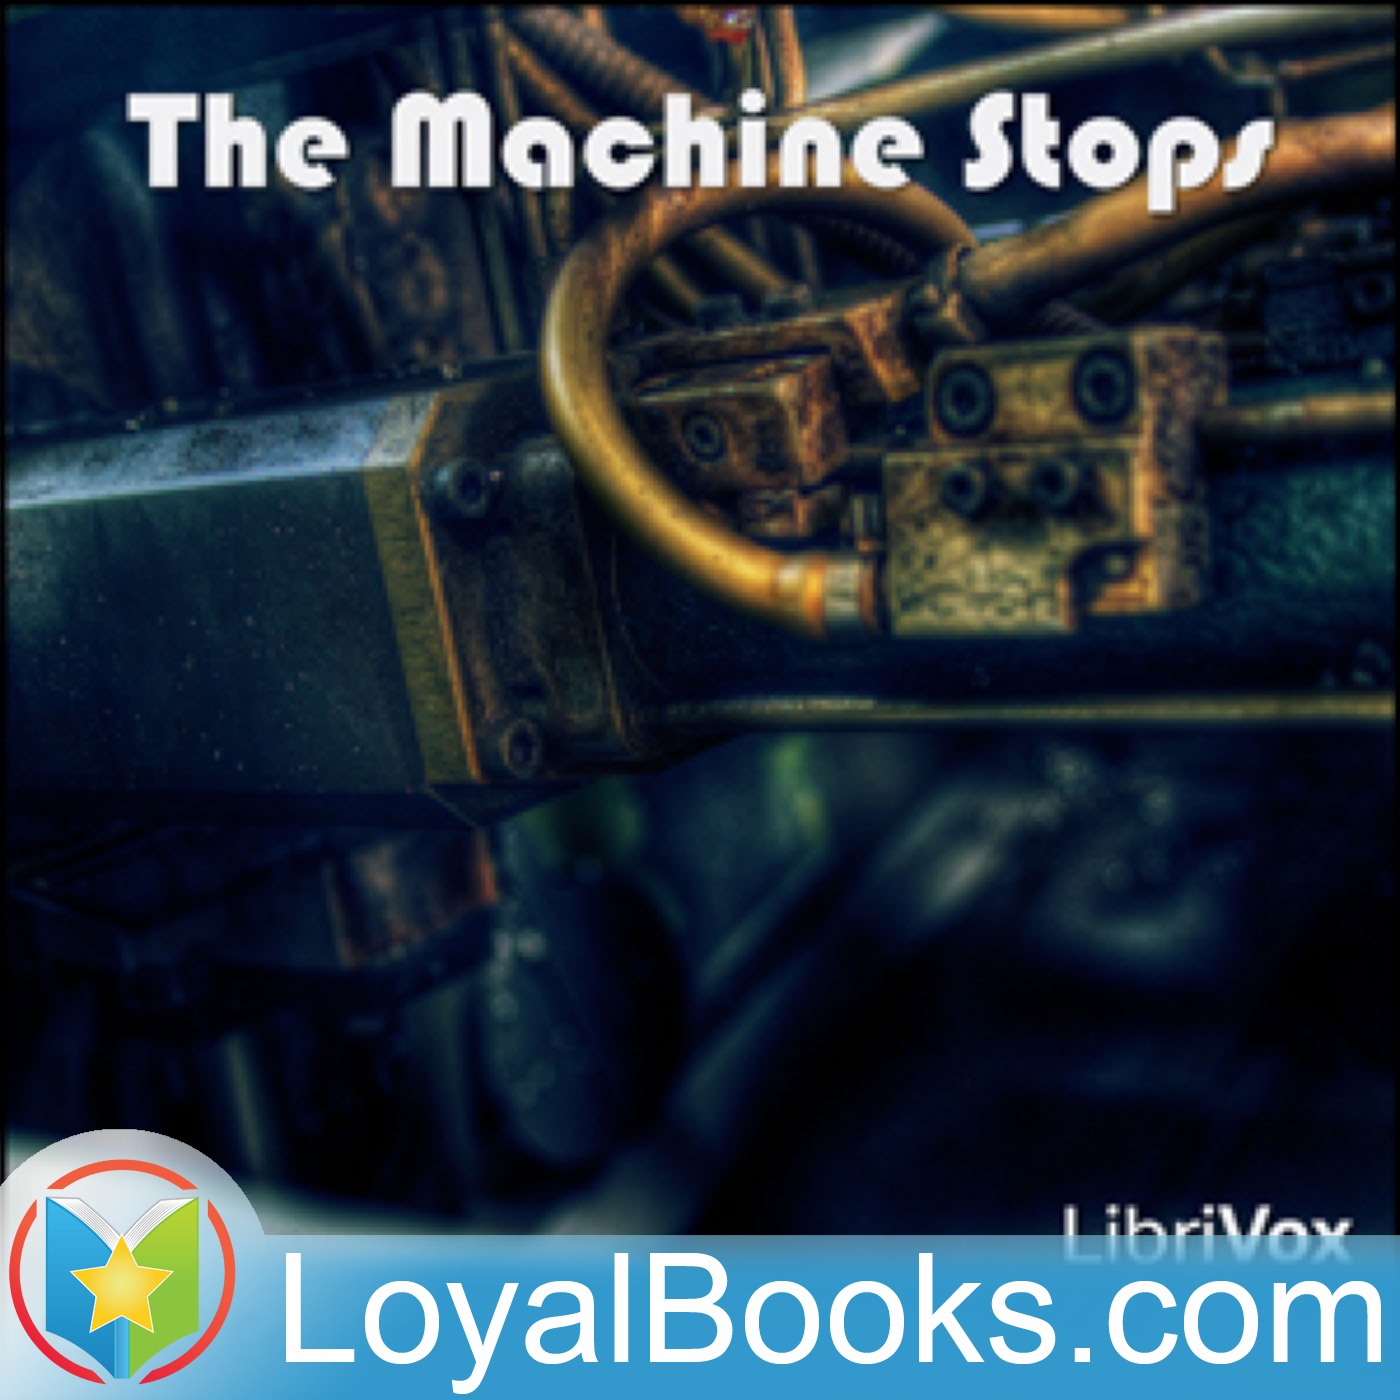 The Machine Stops by Edward M. Forster